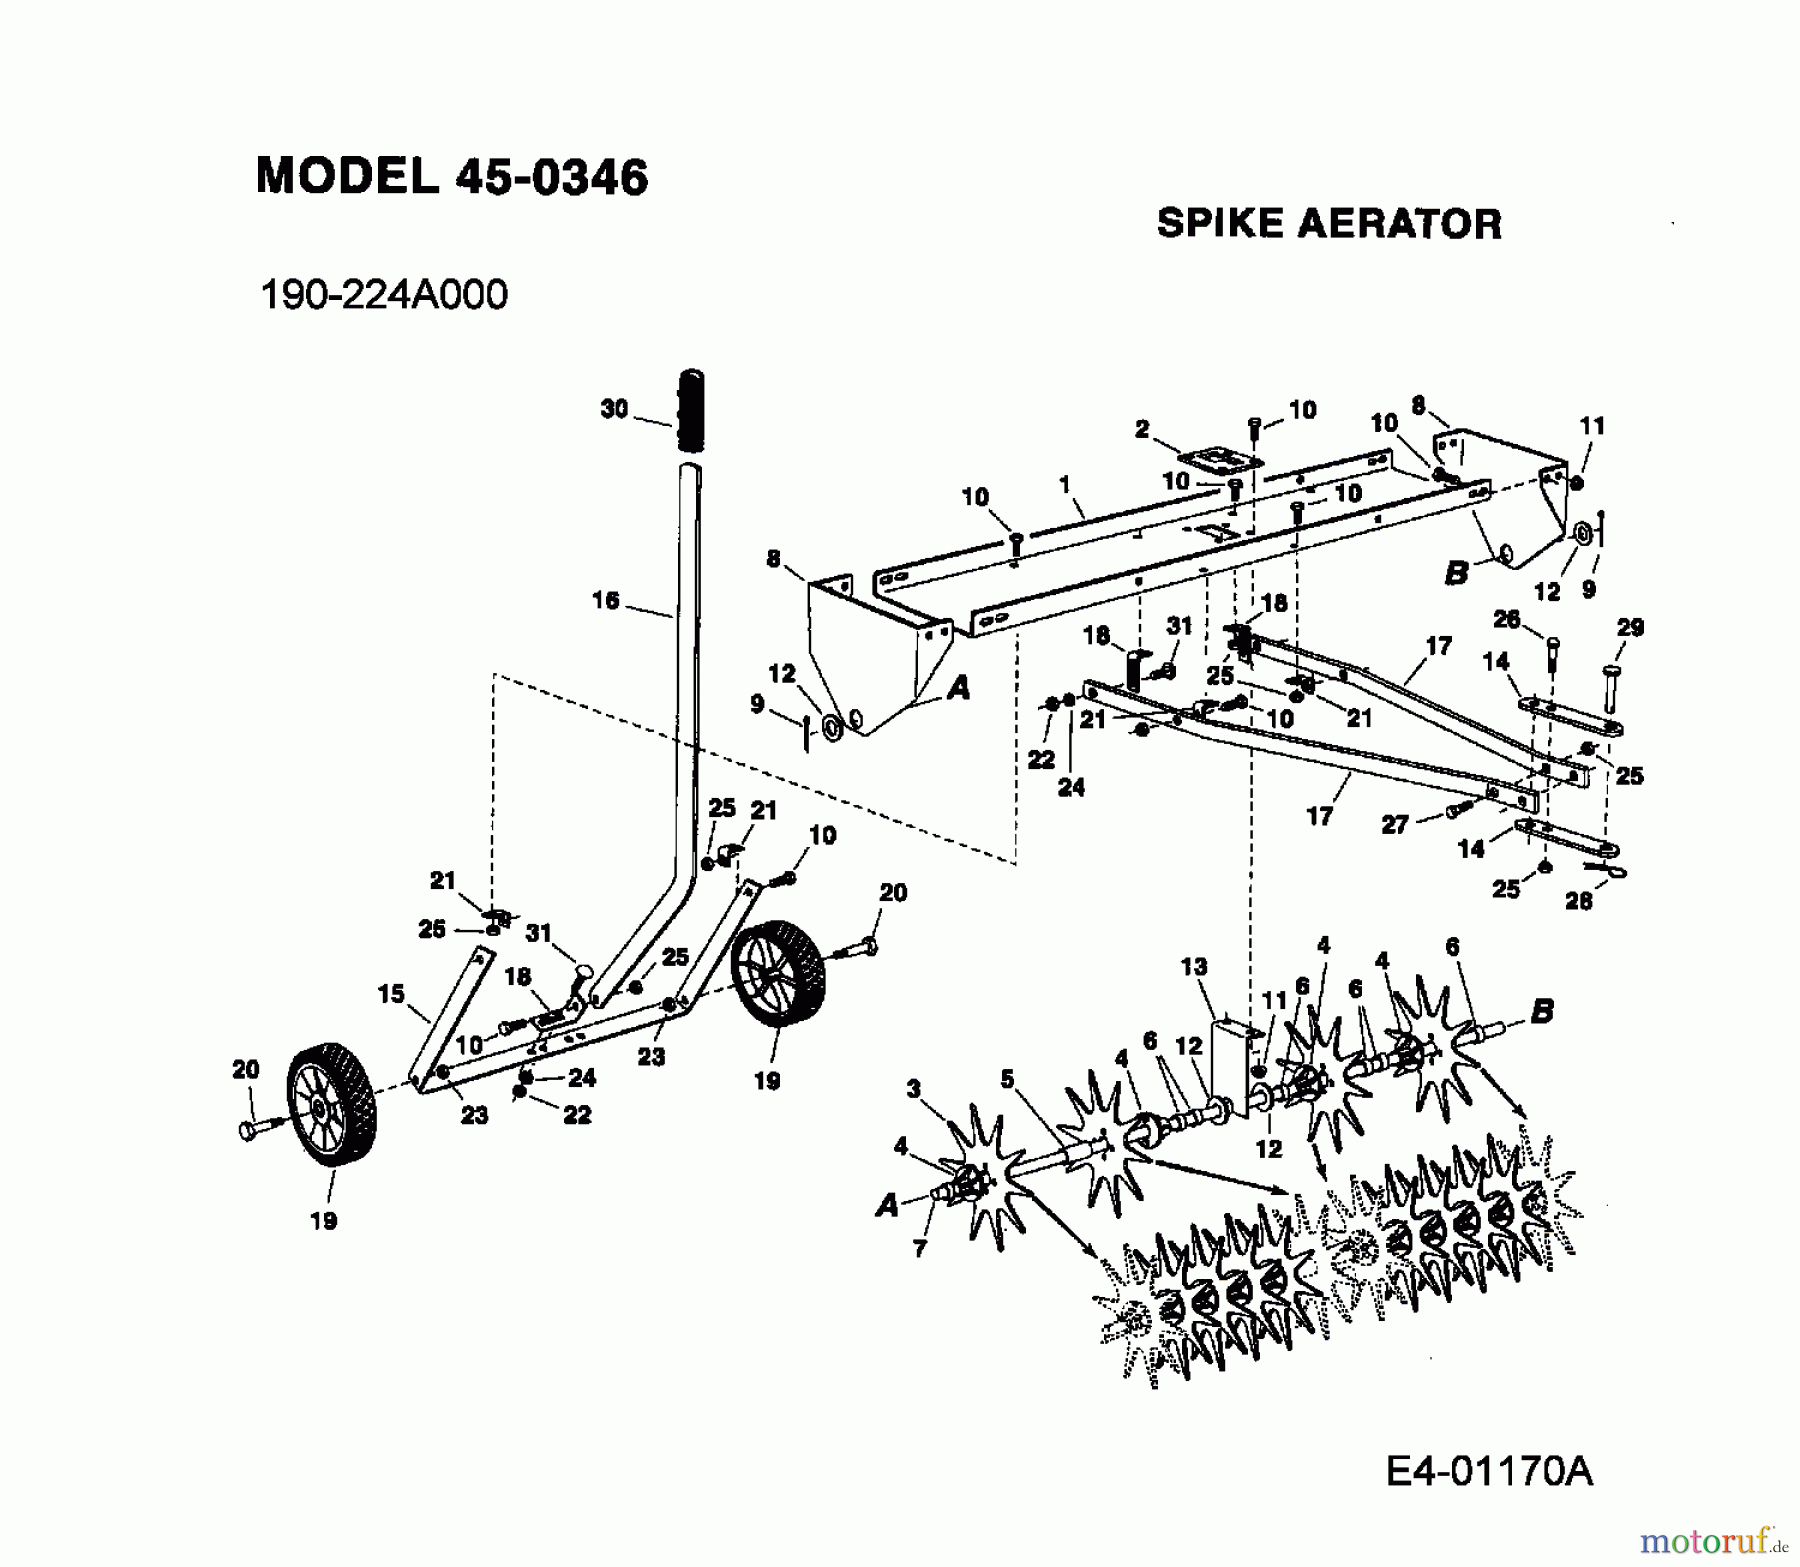  MTD Accessories Accessories garden and lawn tractors Groomer 45-0346  (190-224A000) 190-224A000  (2010) Basic machine